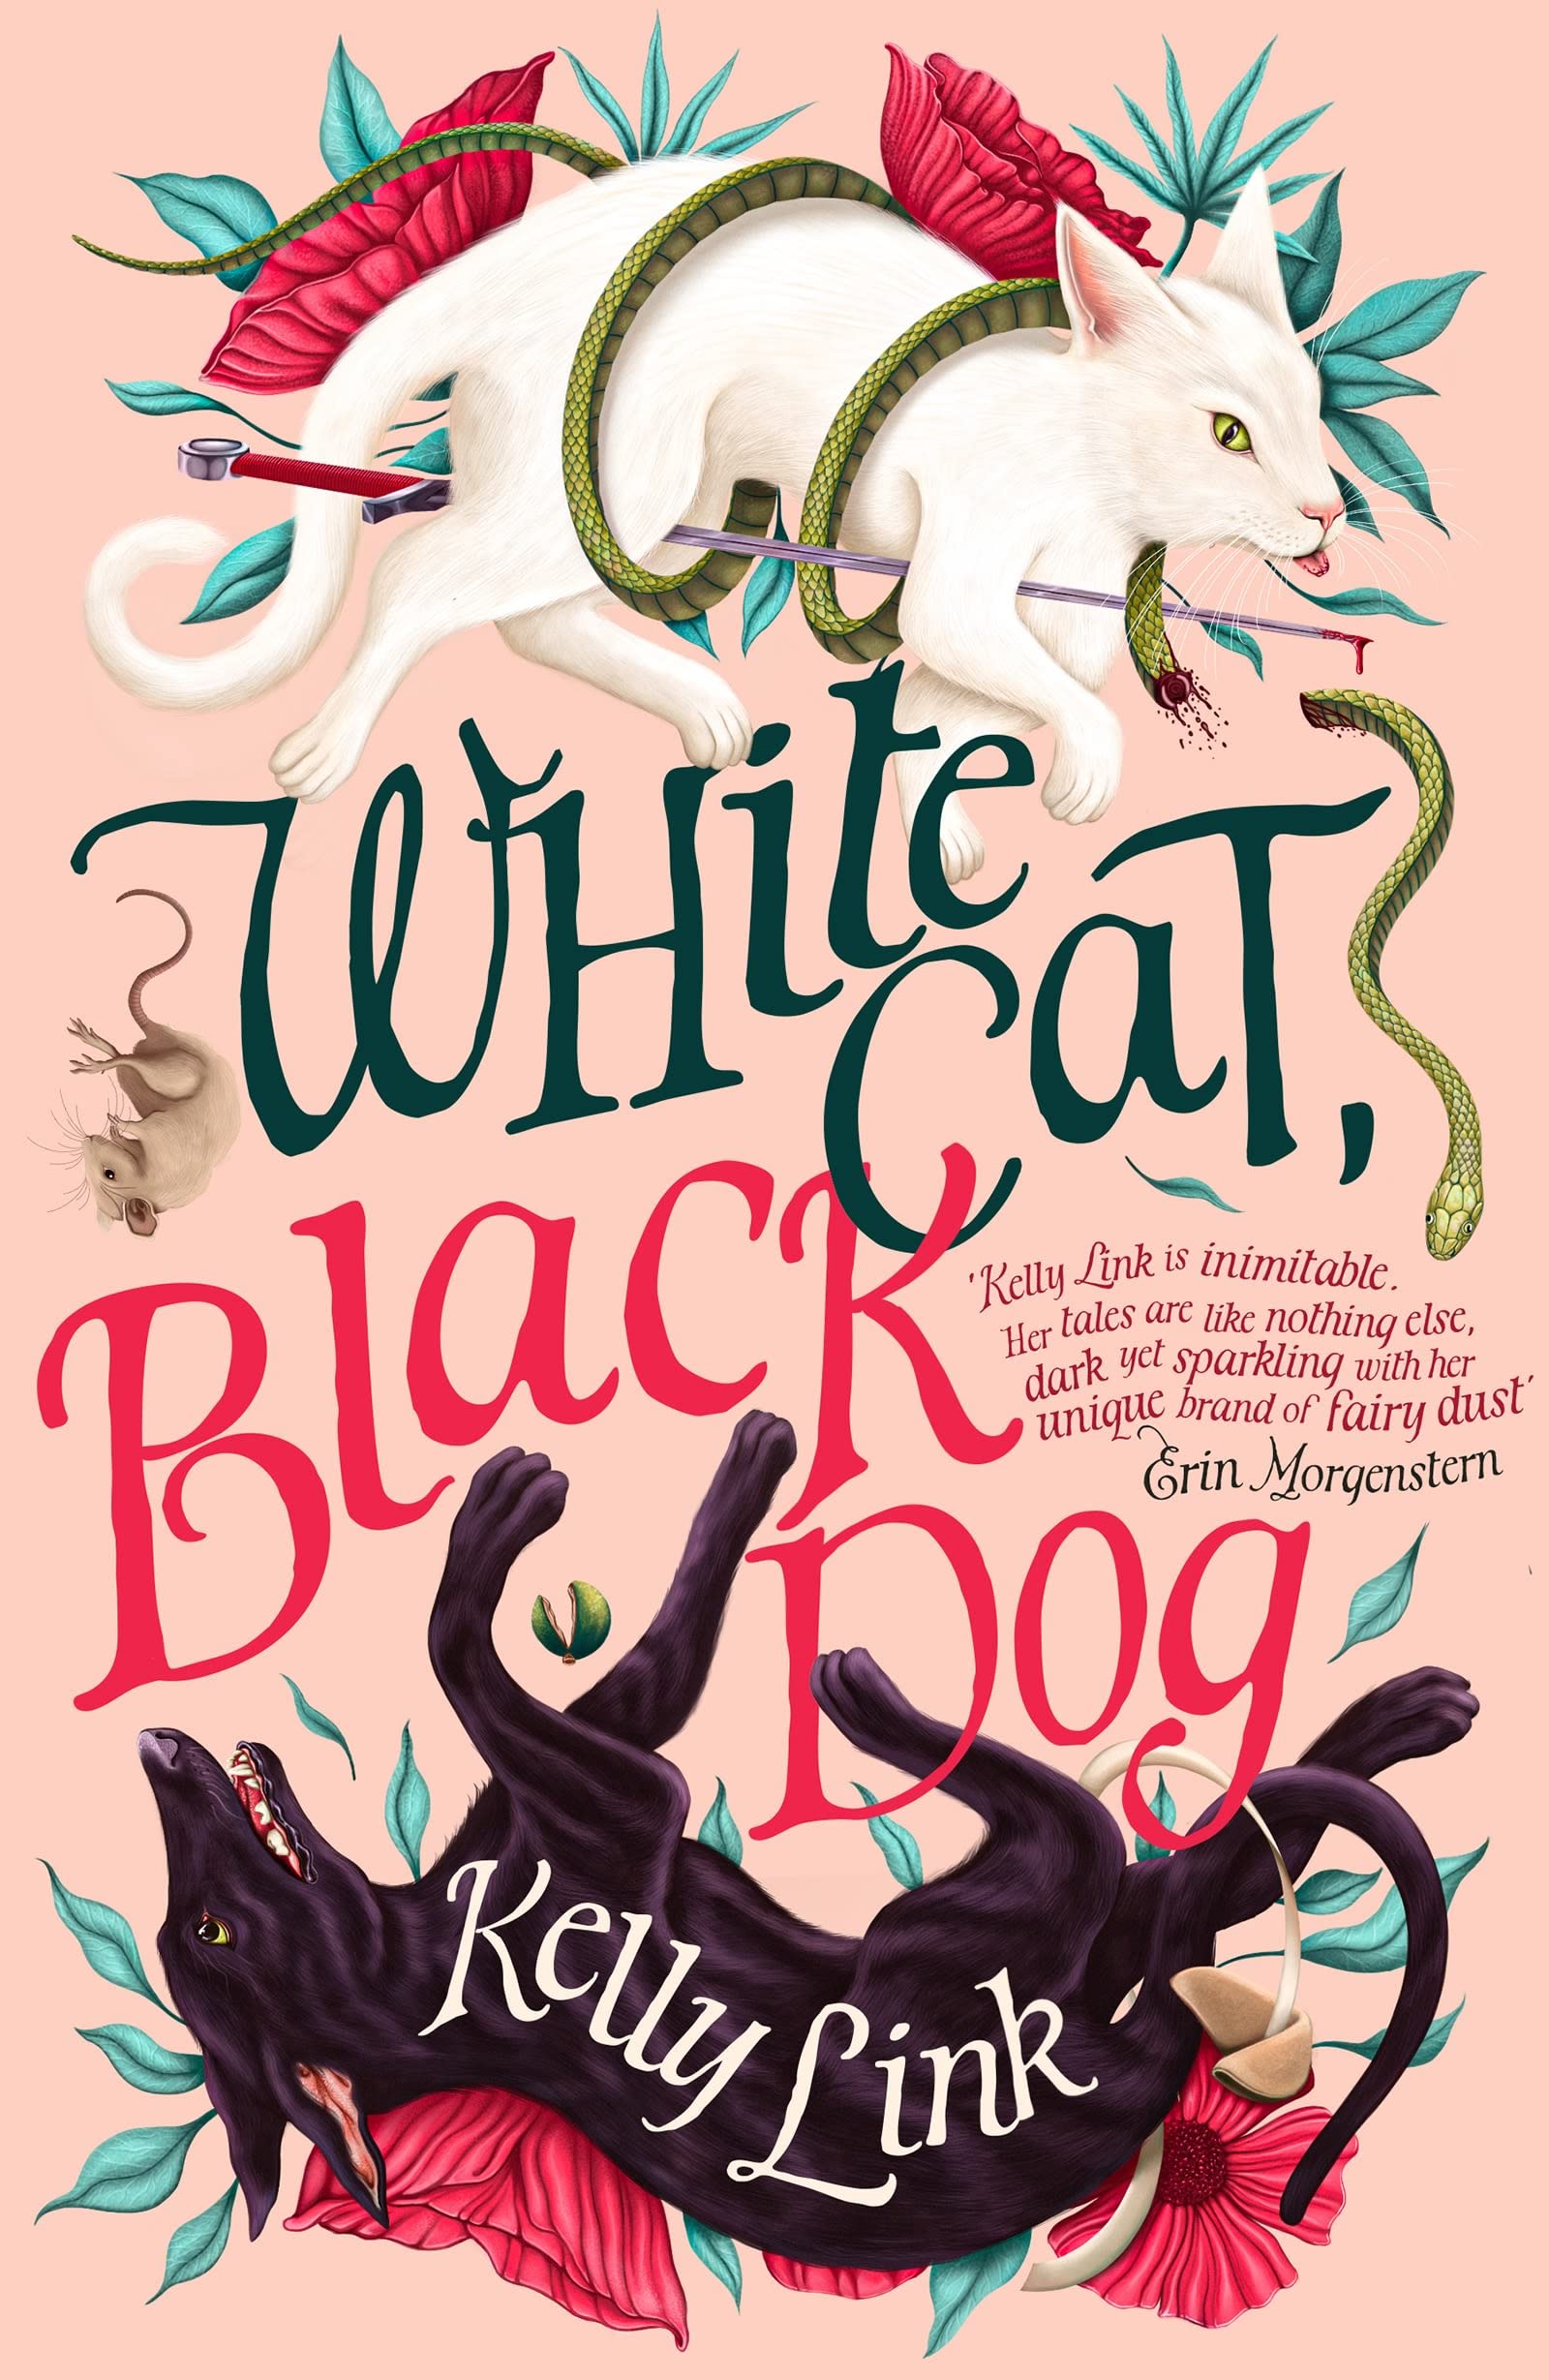 White Cat, Black Dog: Stories by Kelly Link